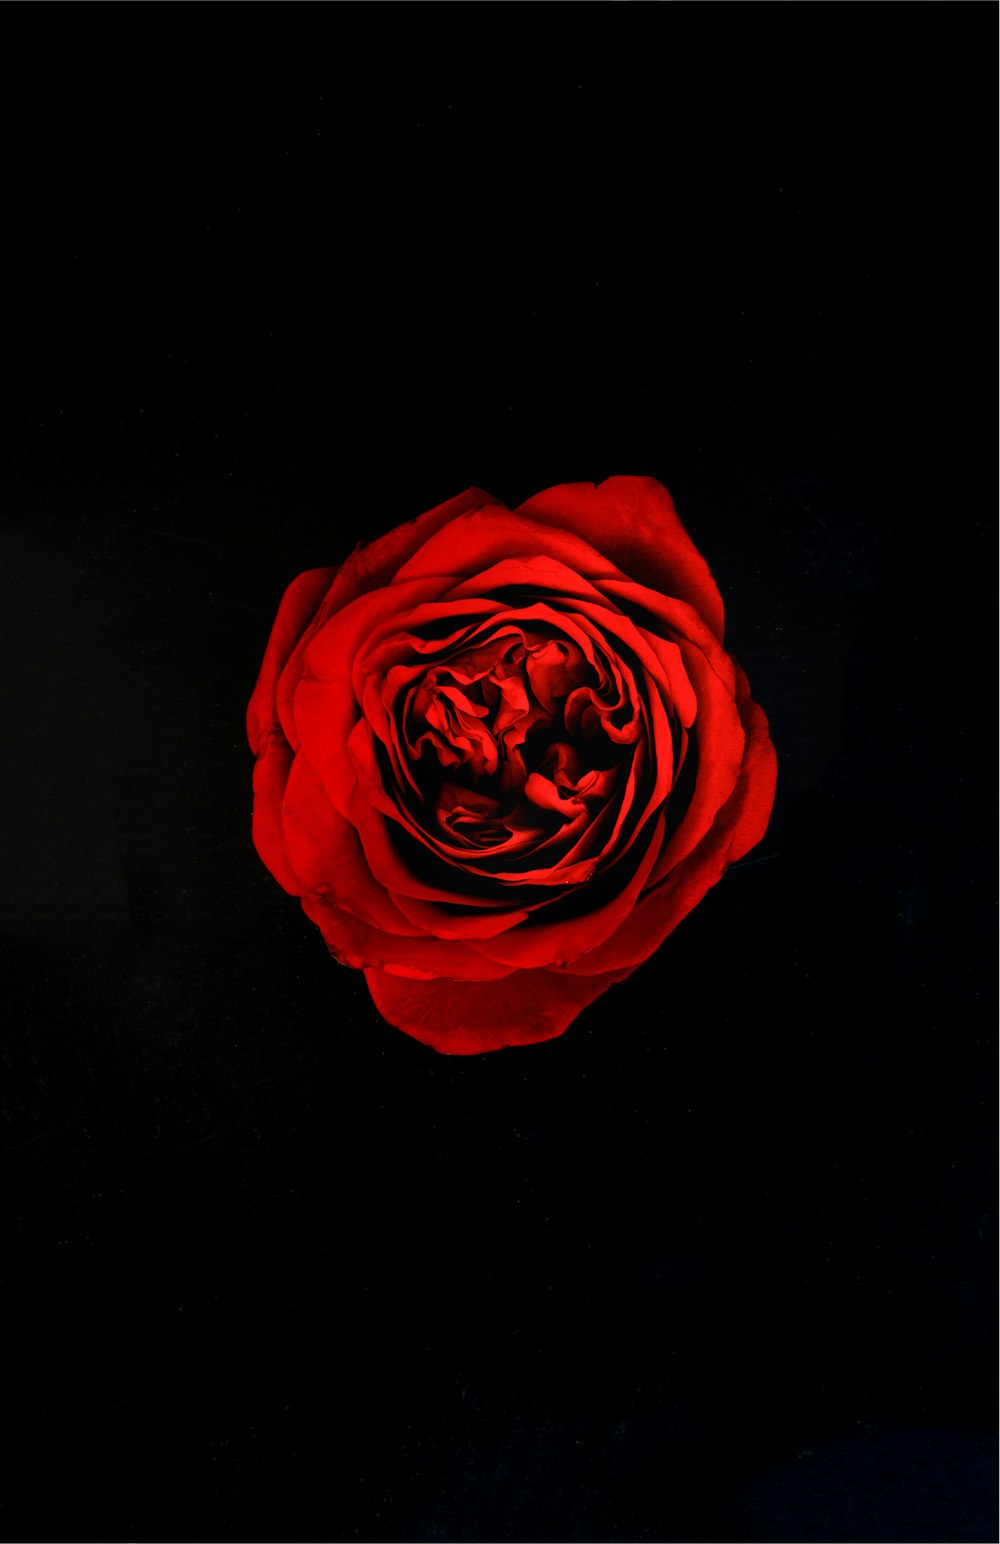 a single red rose on a black background